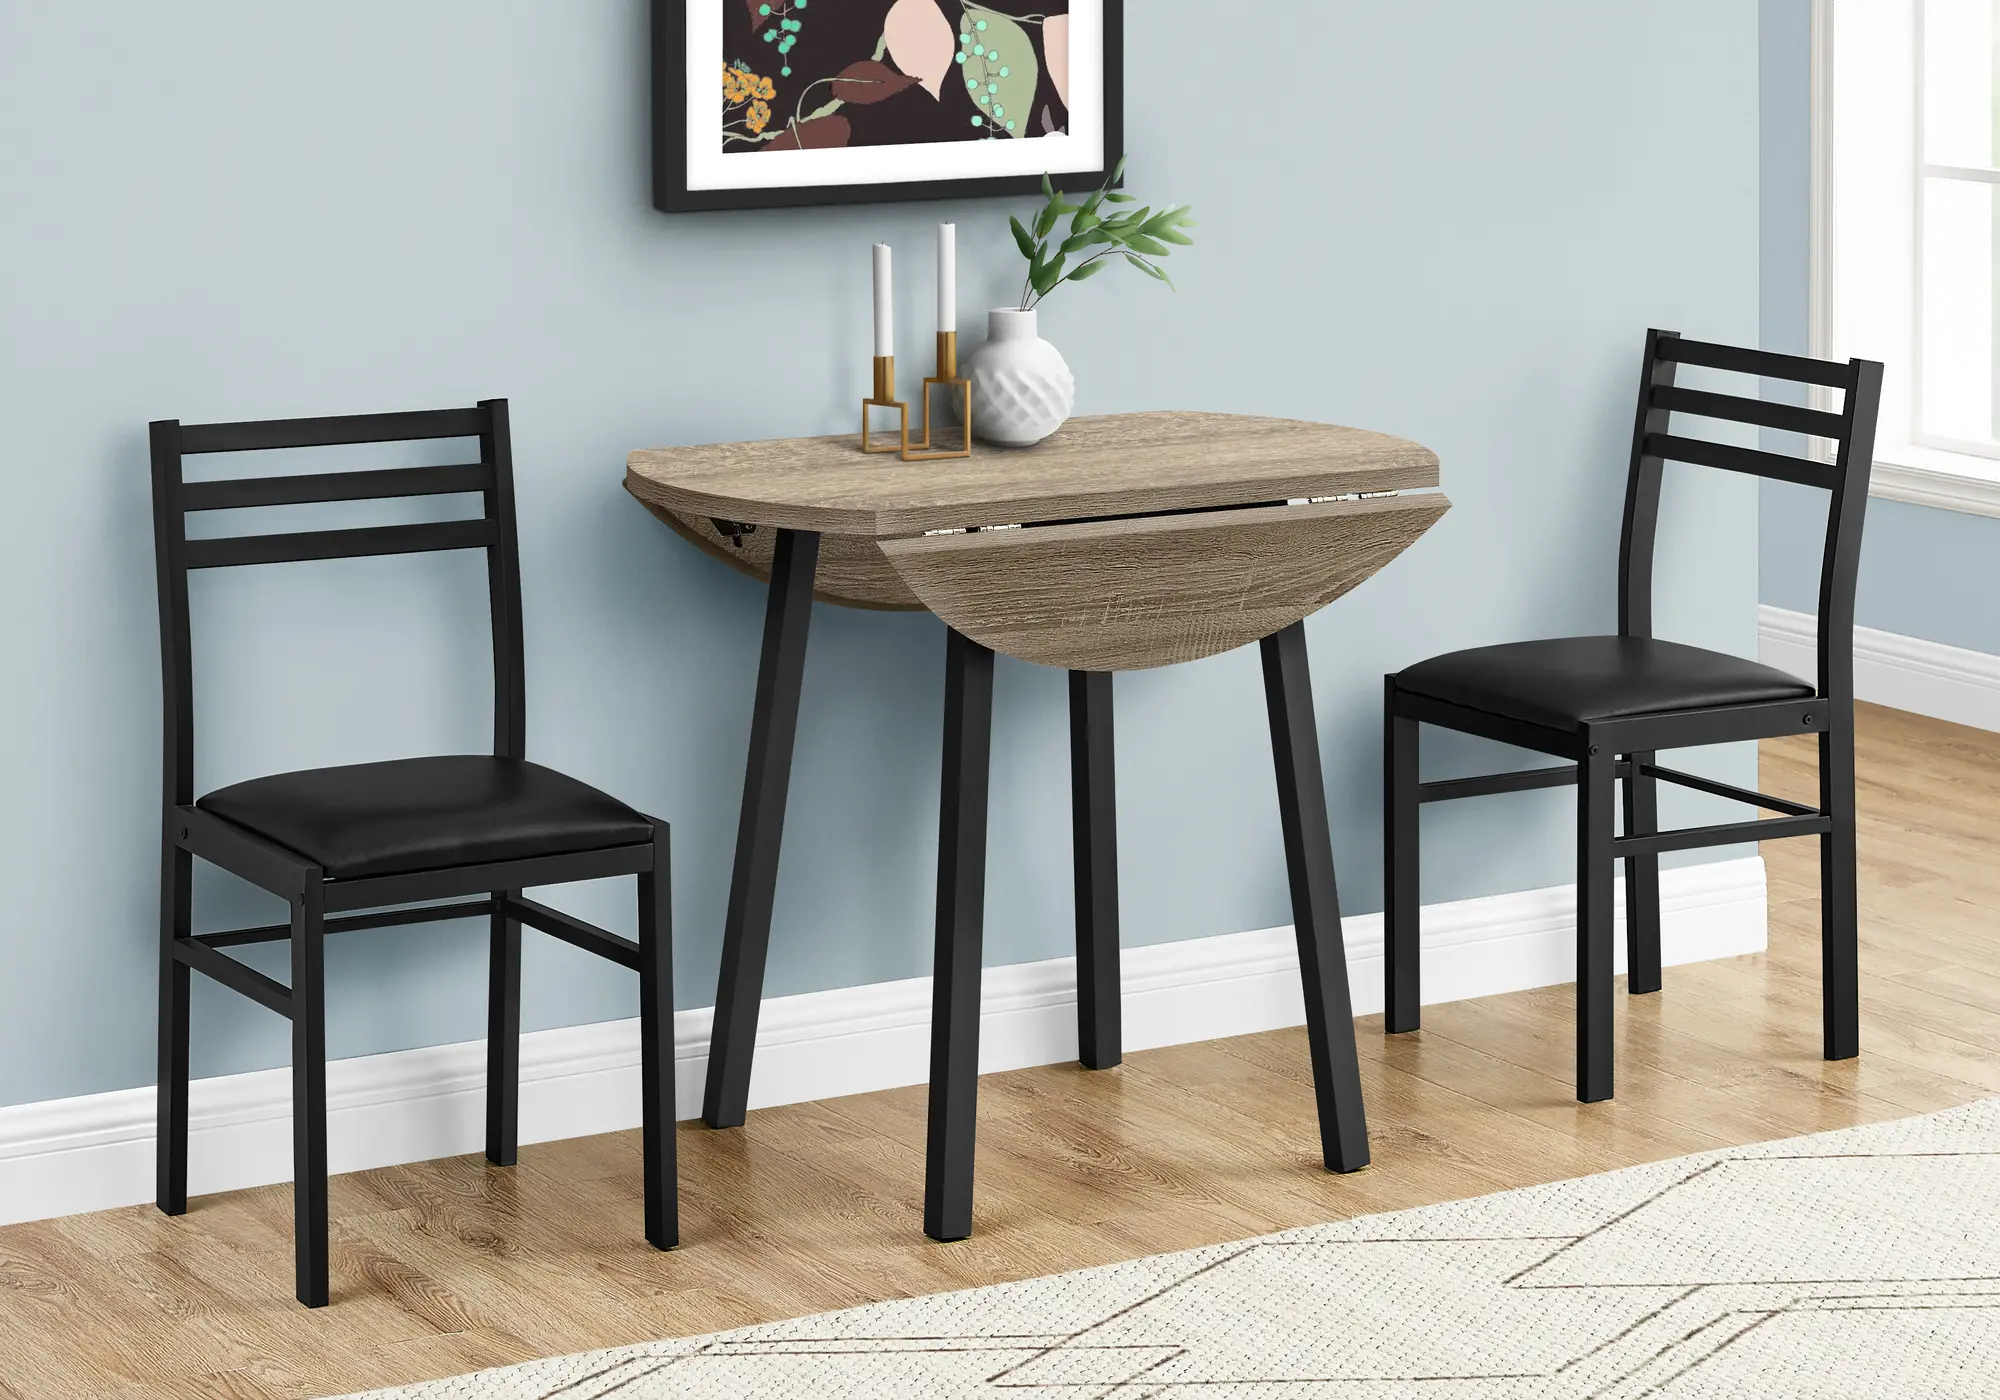 Photos - Corner Dining Set Monarch Specialties Taupe And Black 3 Piece Dining Room Set I 1003 